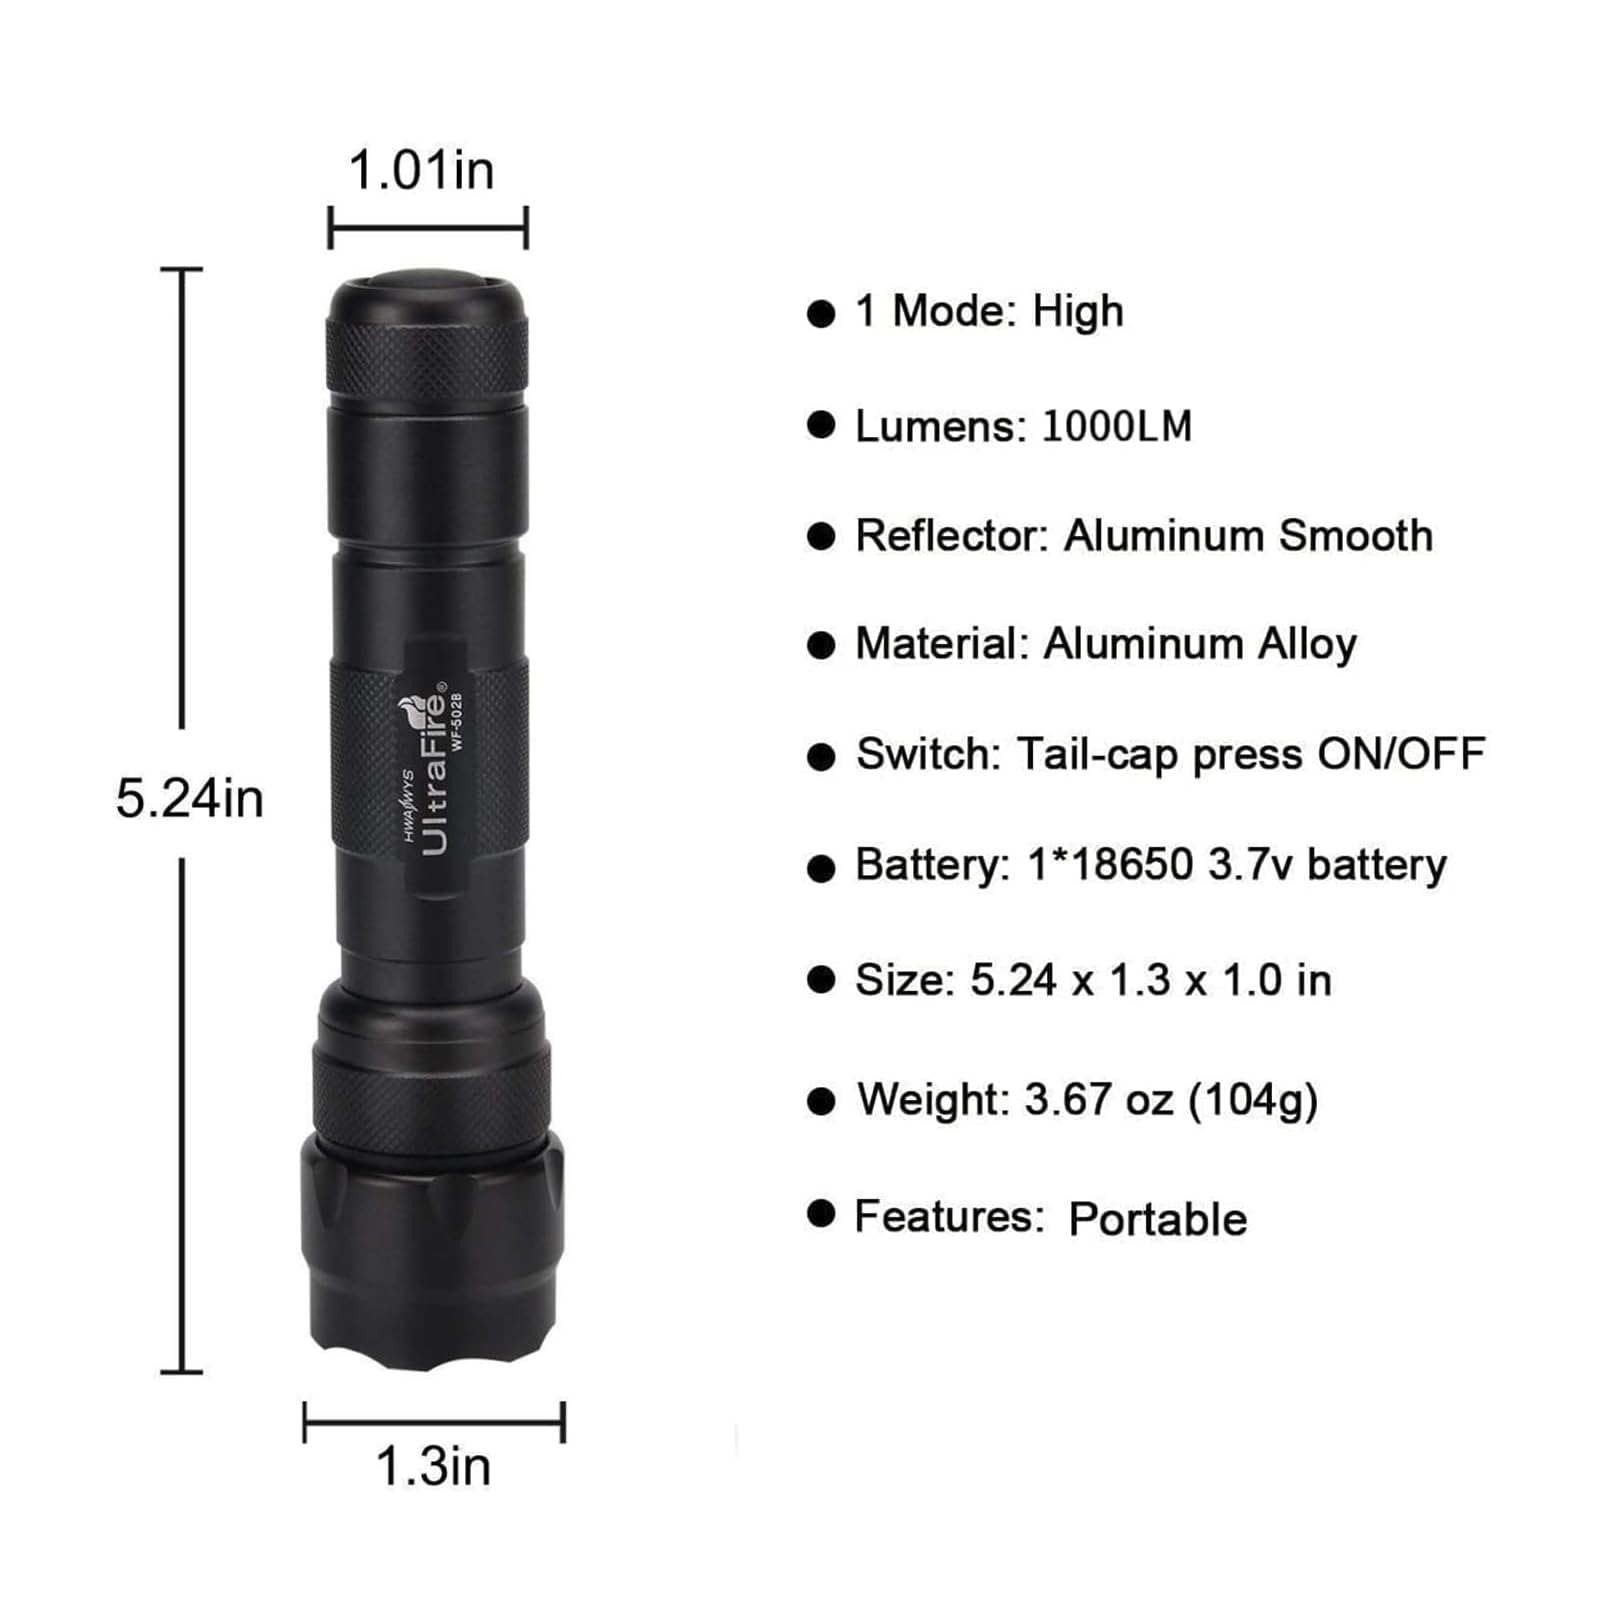 ULTRAFIRE WF-502B Tactical Flashlight with Holster, Single Mode 1000 Lumens LED Flashlight with Duty Belt Holster, Bright Small EDC Flashlight with Torch Case Holder Pouch (Battery Not Included)